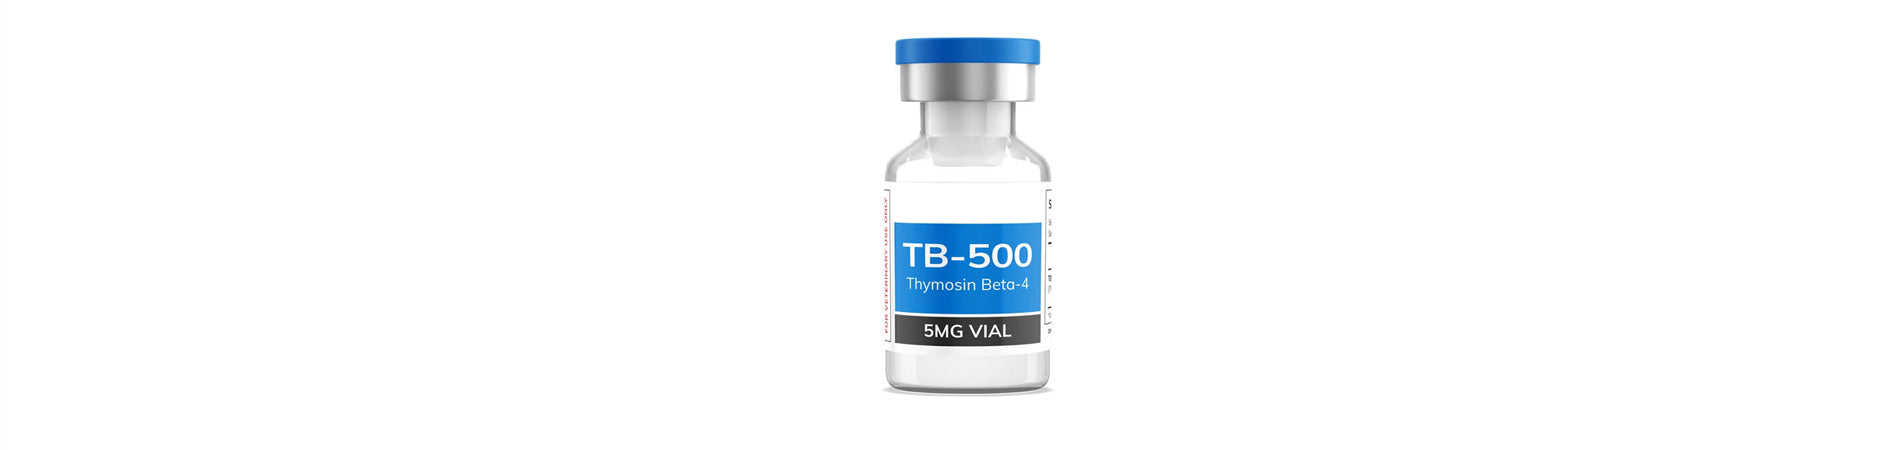 TB-500 and Its Benefits on Muscle Gains